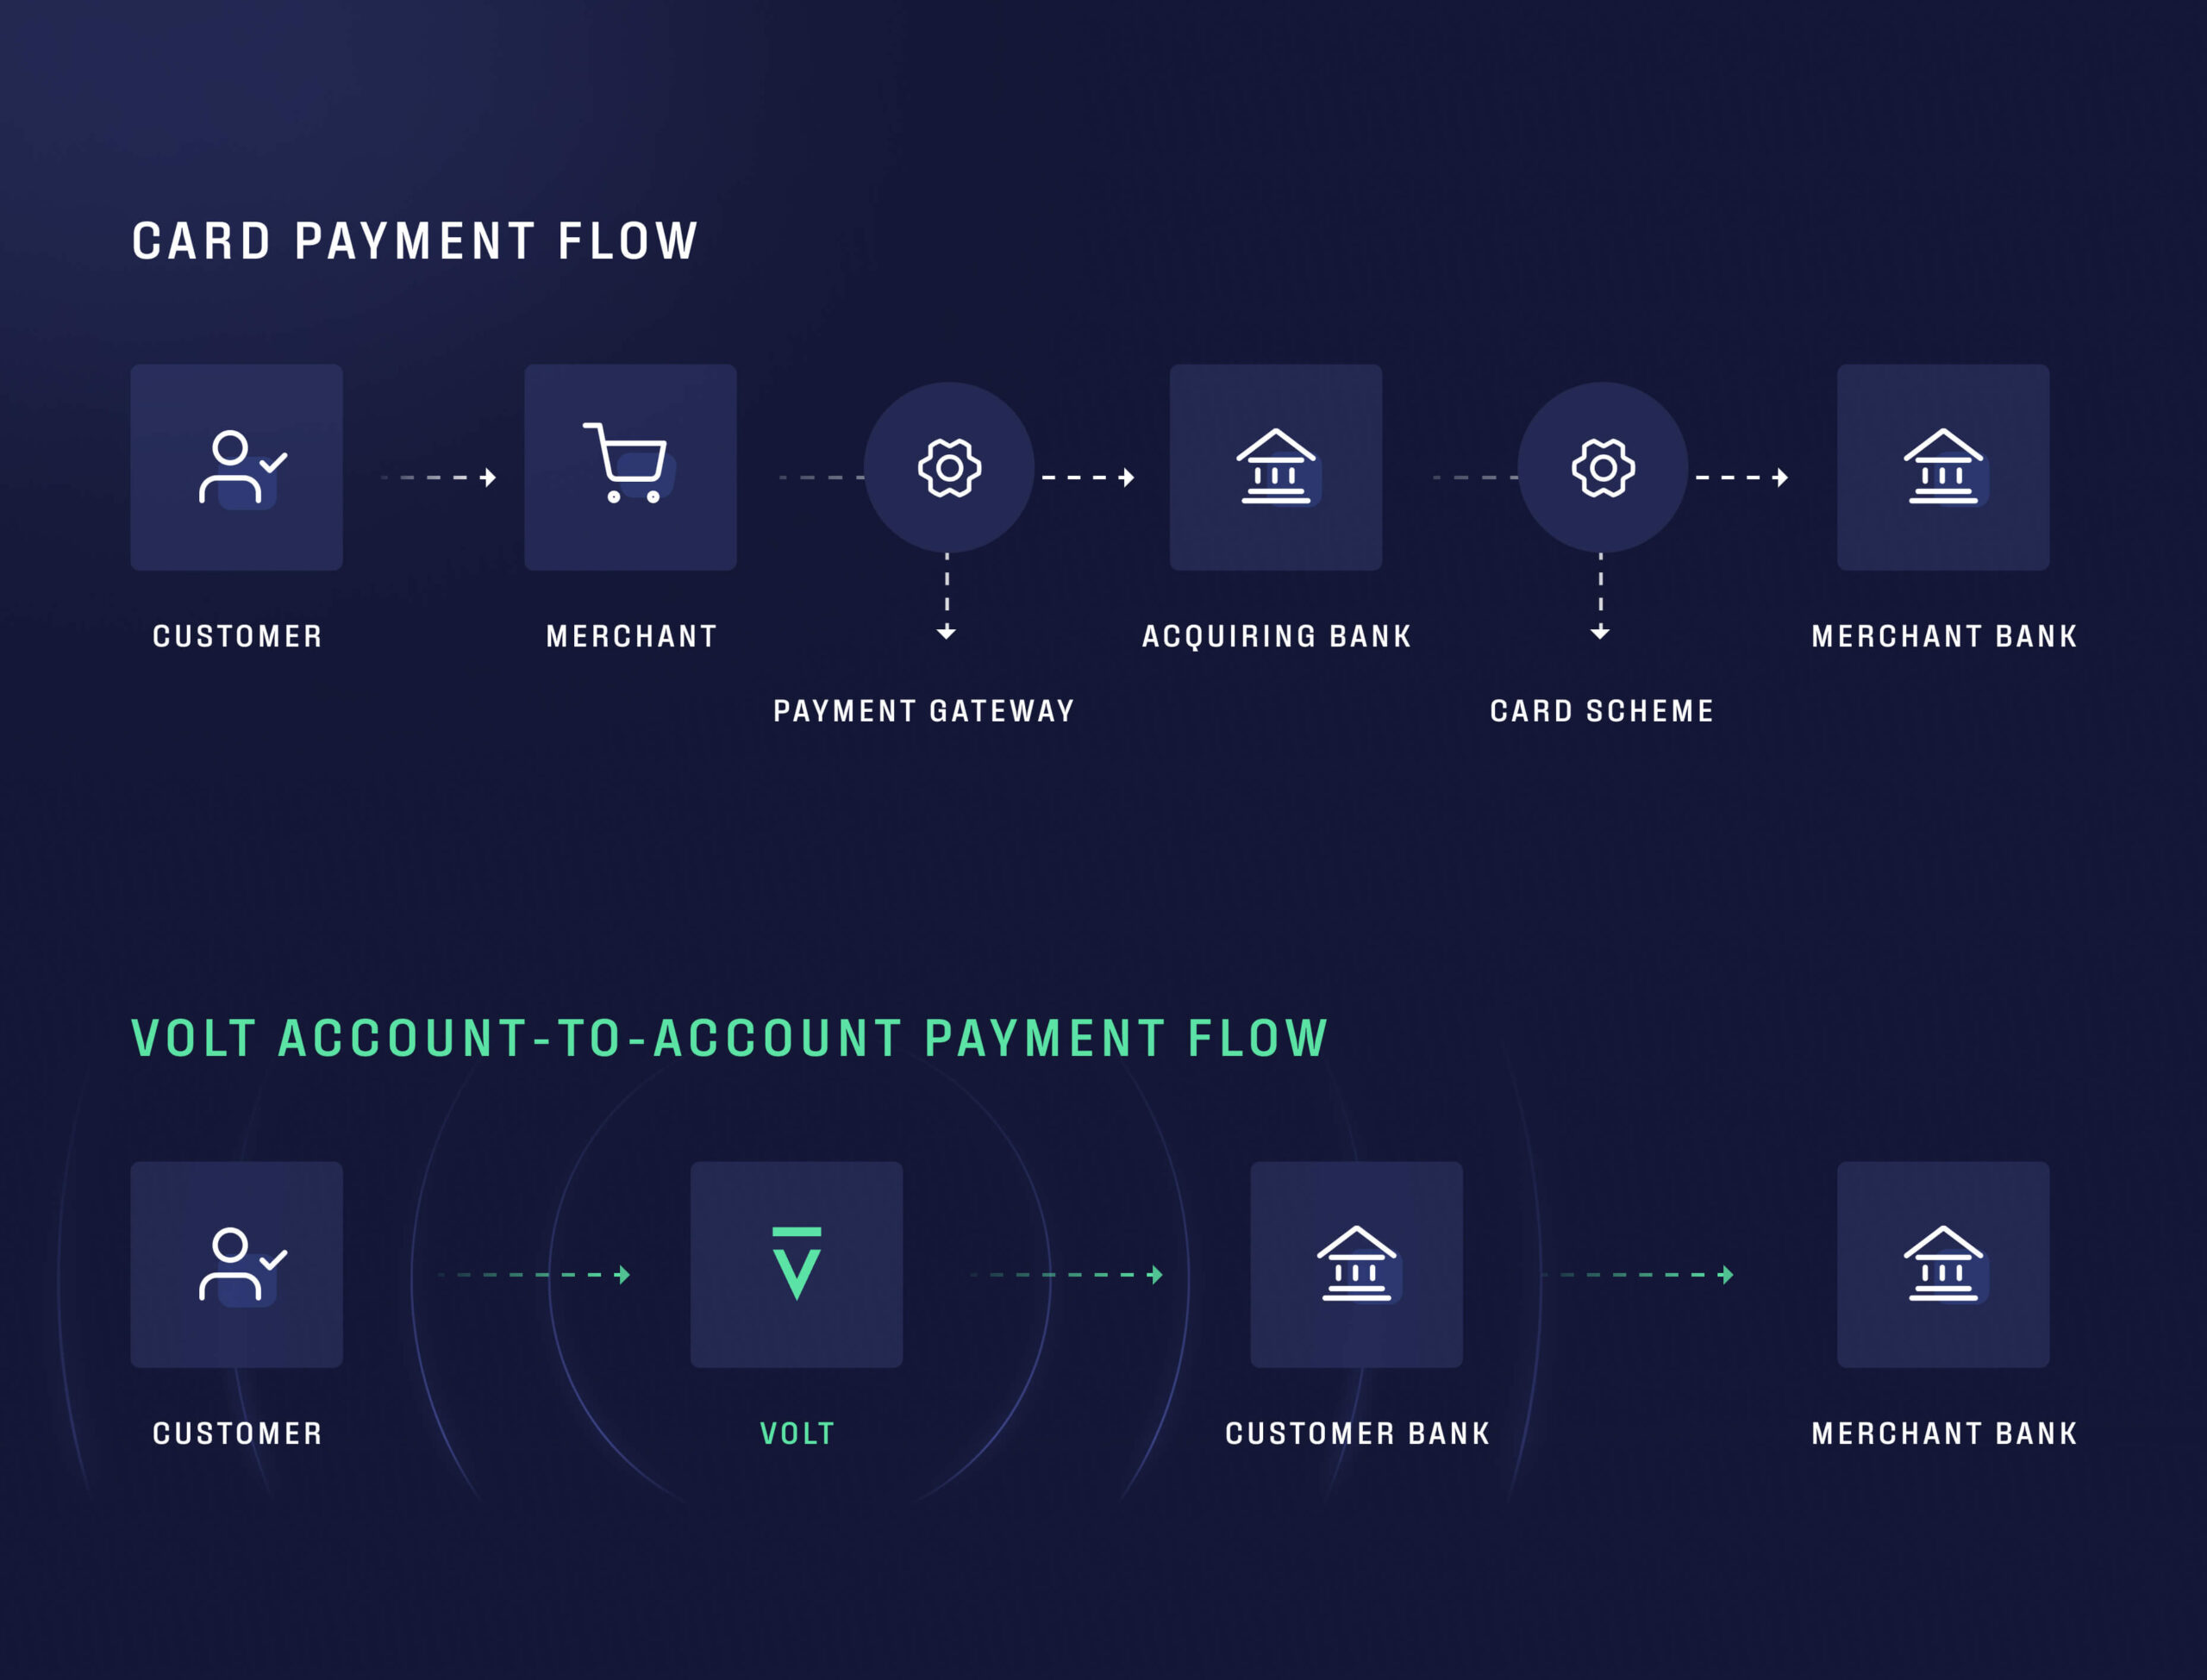 Card payment flow versus account-to-account